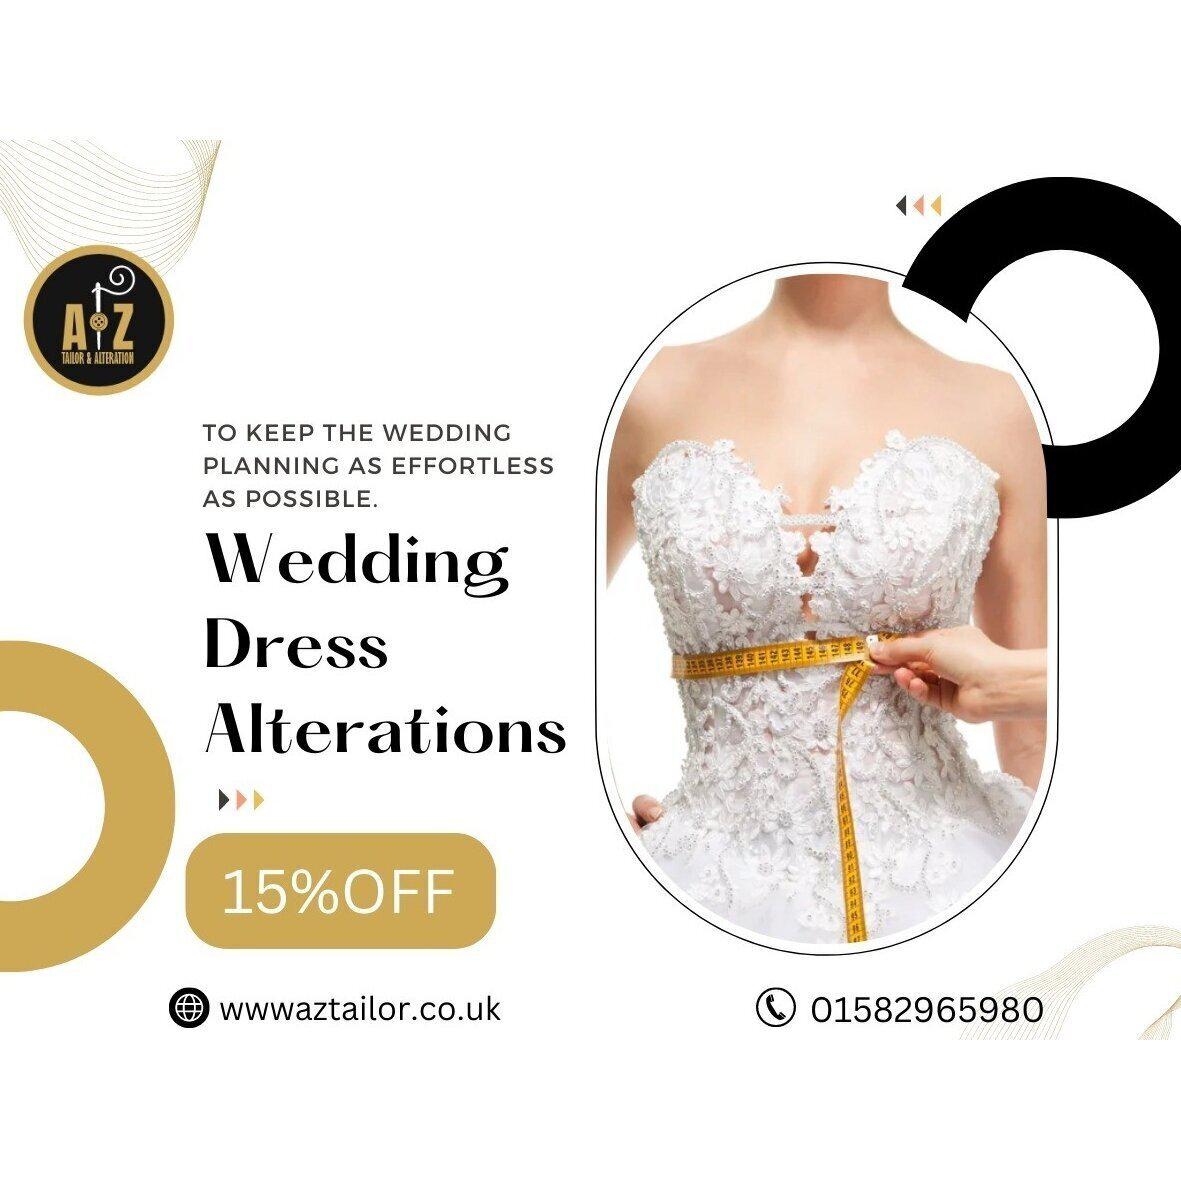 Images A & Z Tailor & Alteration Best Wedding & Bespoke Tailoring Luton